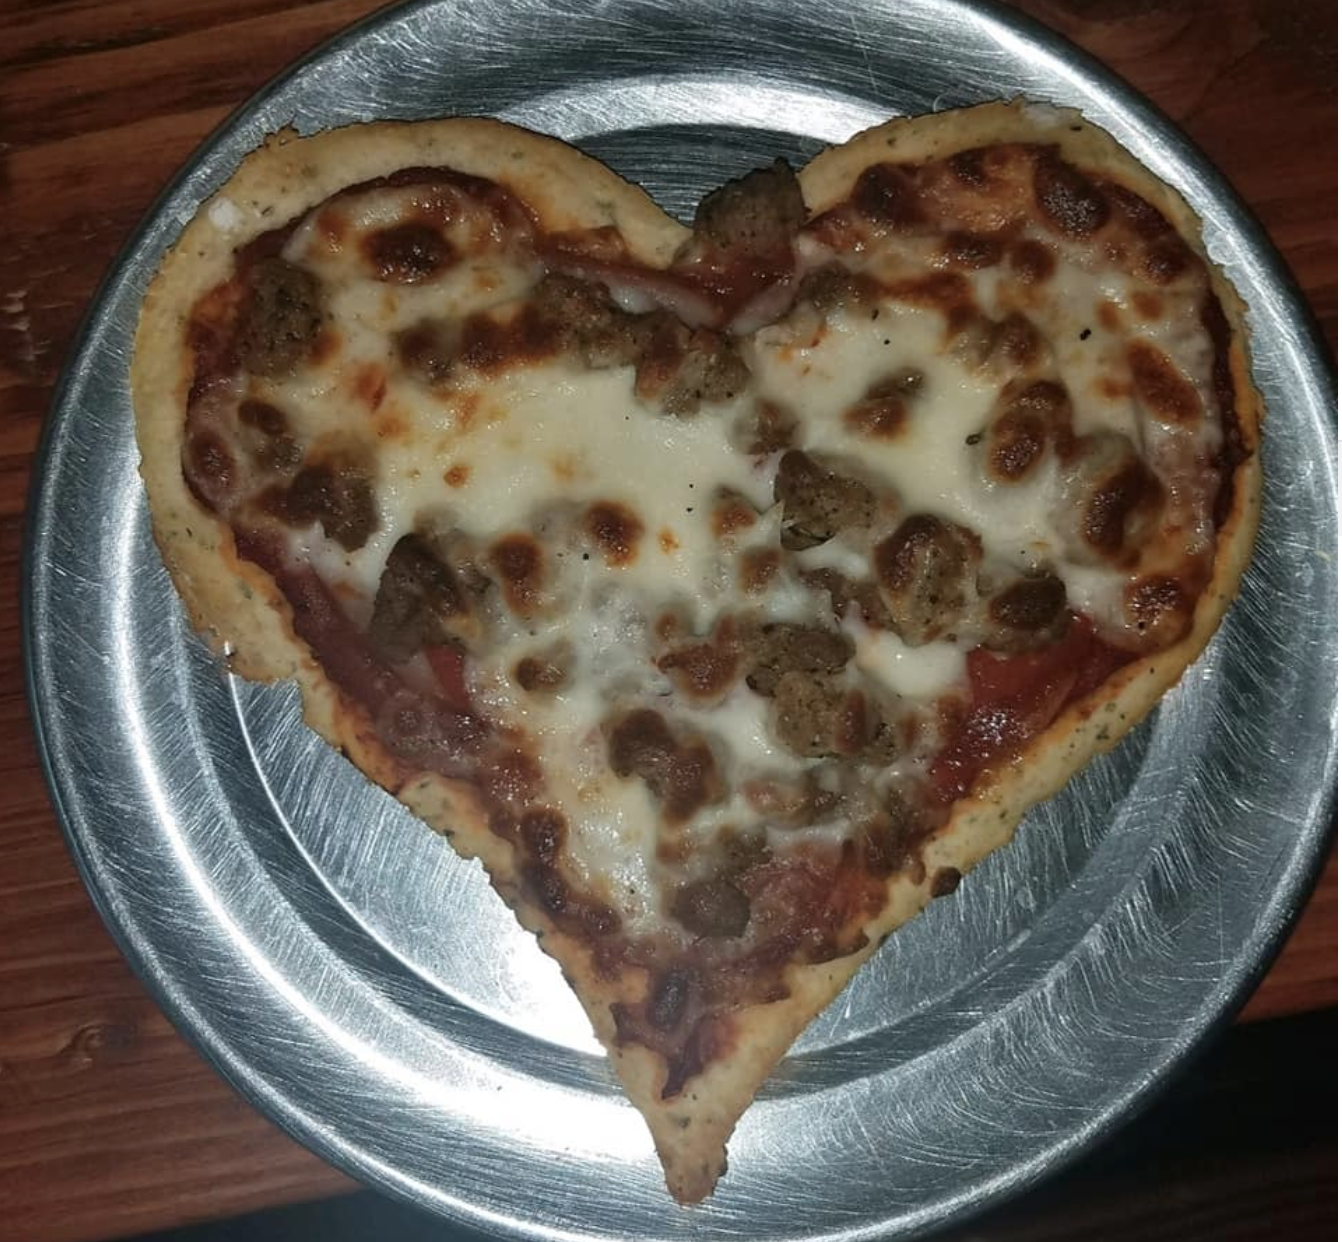 Heart-shaped pizza from Wood'y’s Brick Oven Pizza